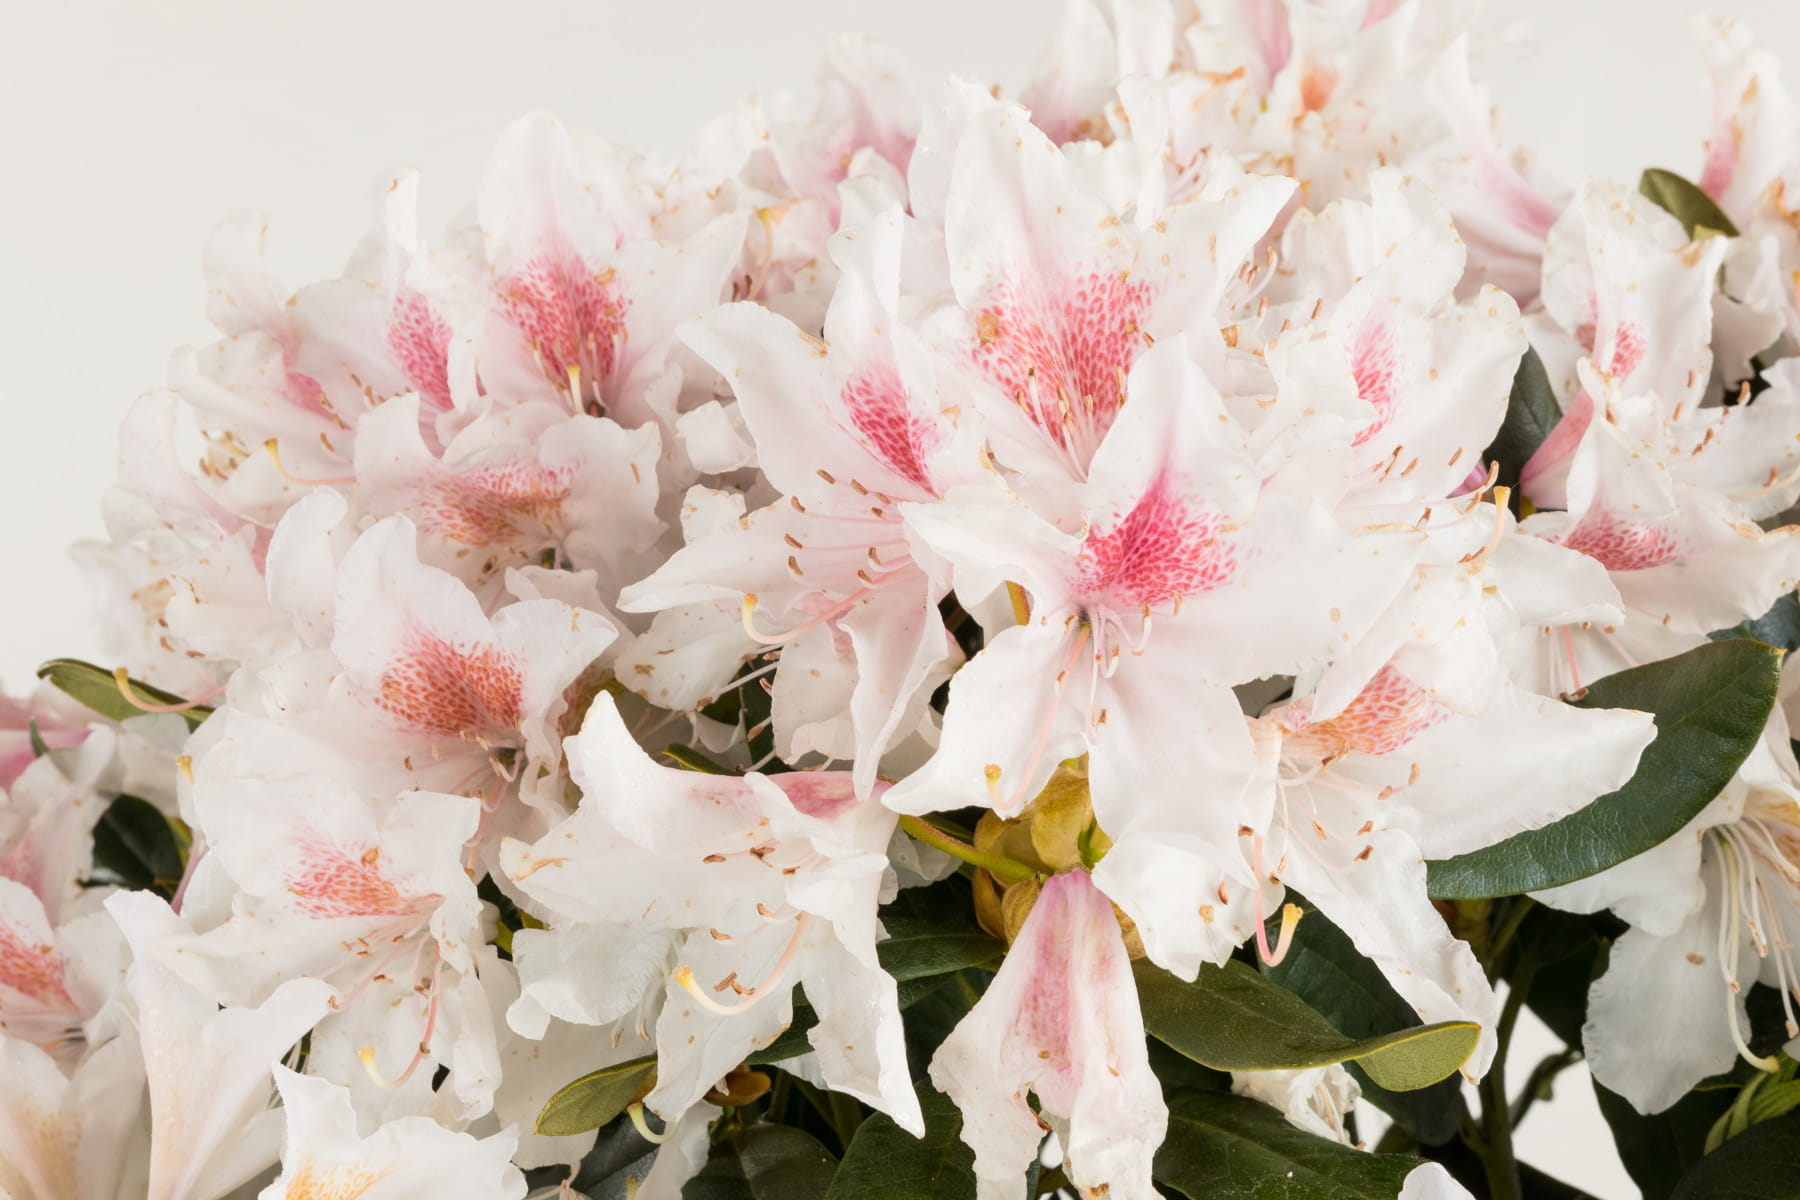 Rhododendron 'Cunninghams White' • Rhododendron Hybride 'Cunninghams White'